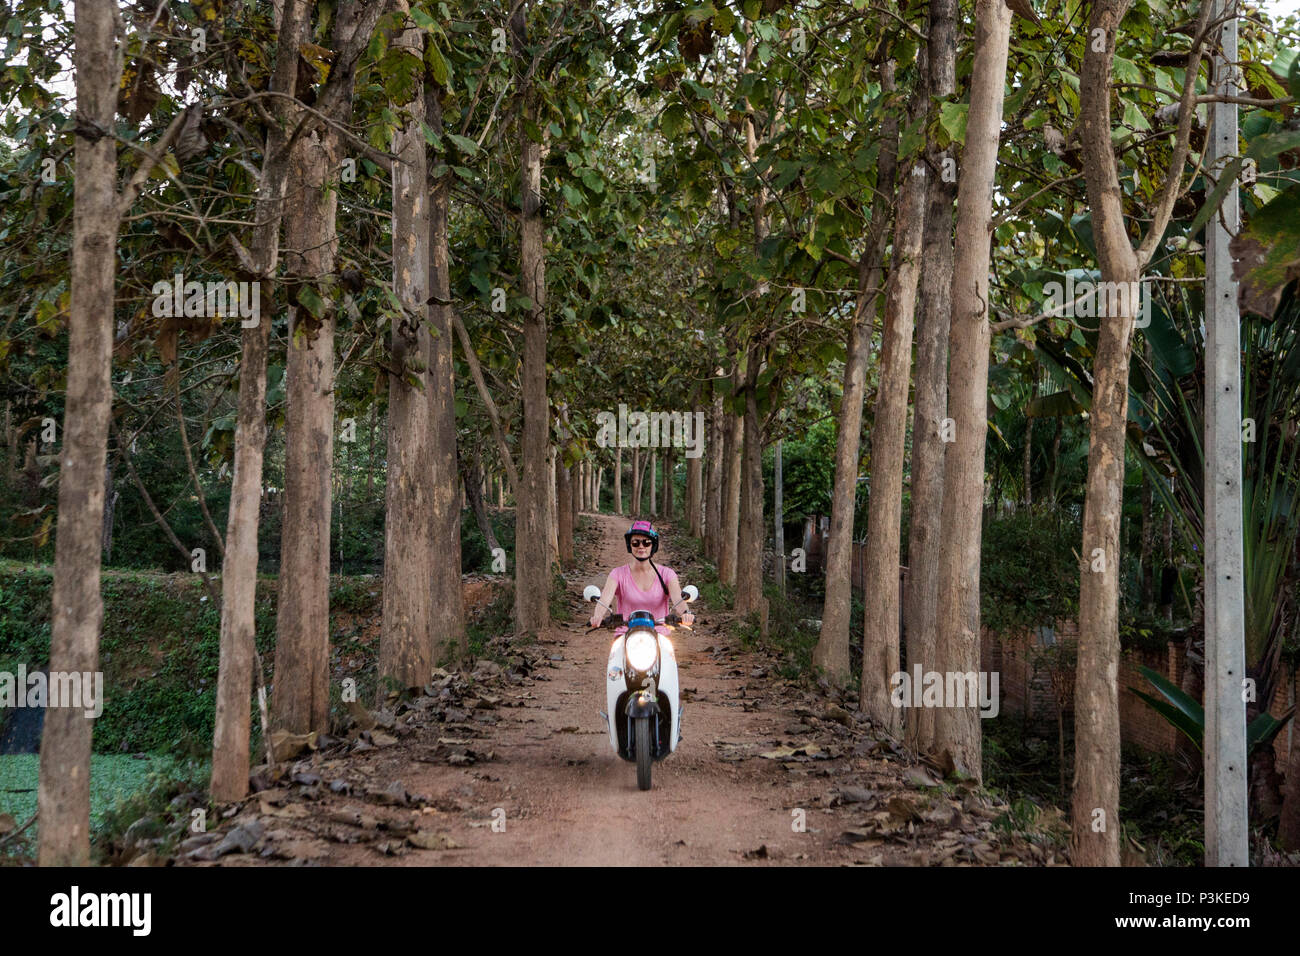 Woman riding scooter on forest road, Pai, Mae Hong Soon, Thailand Stock Photo